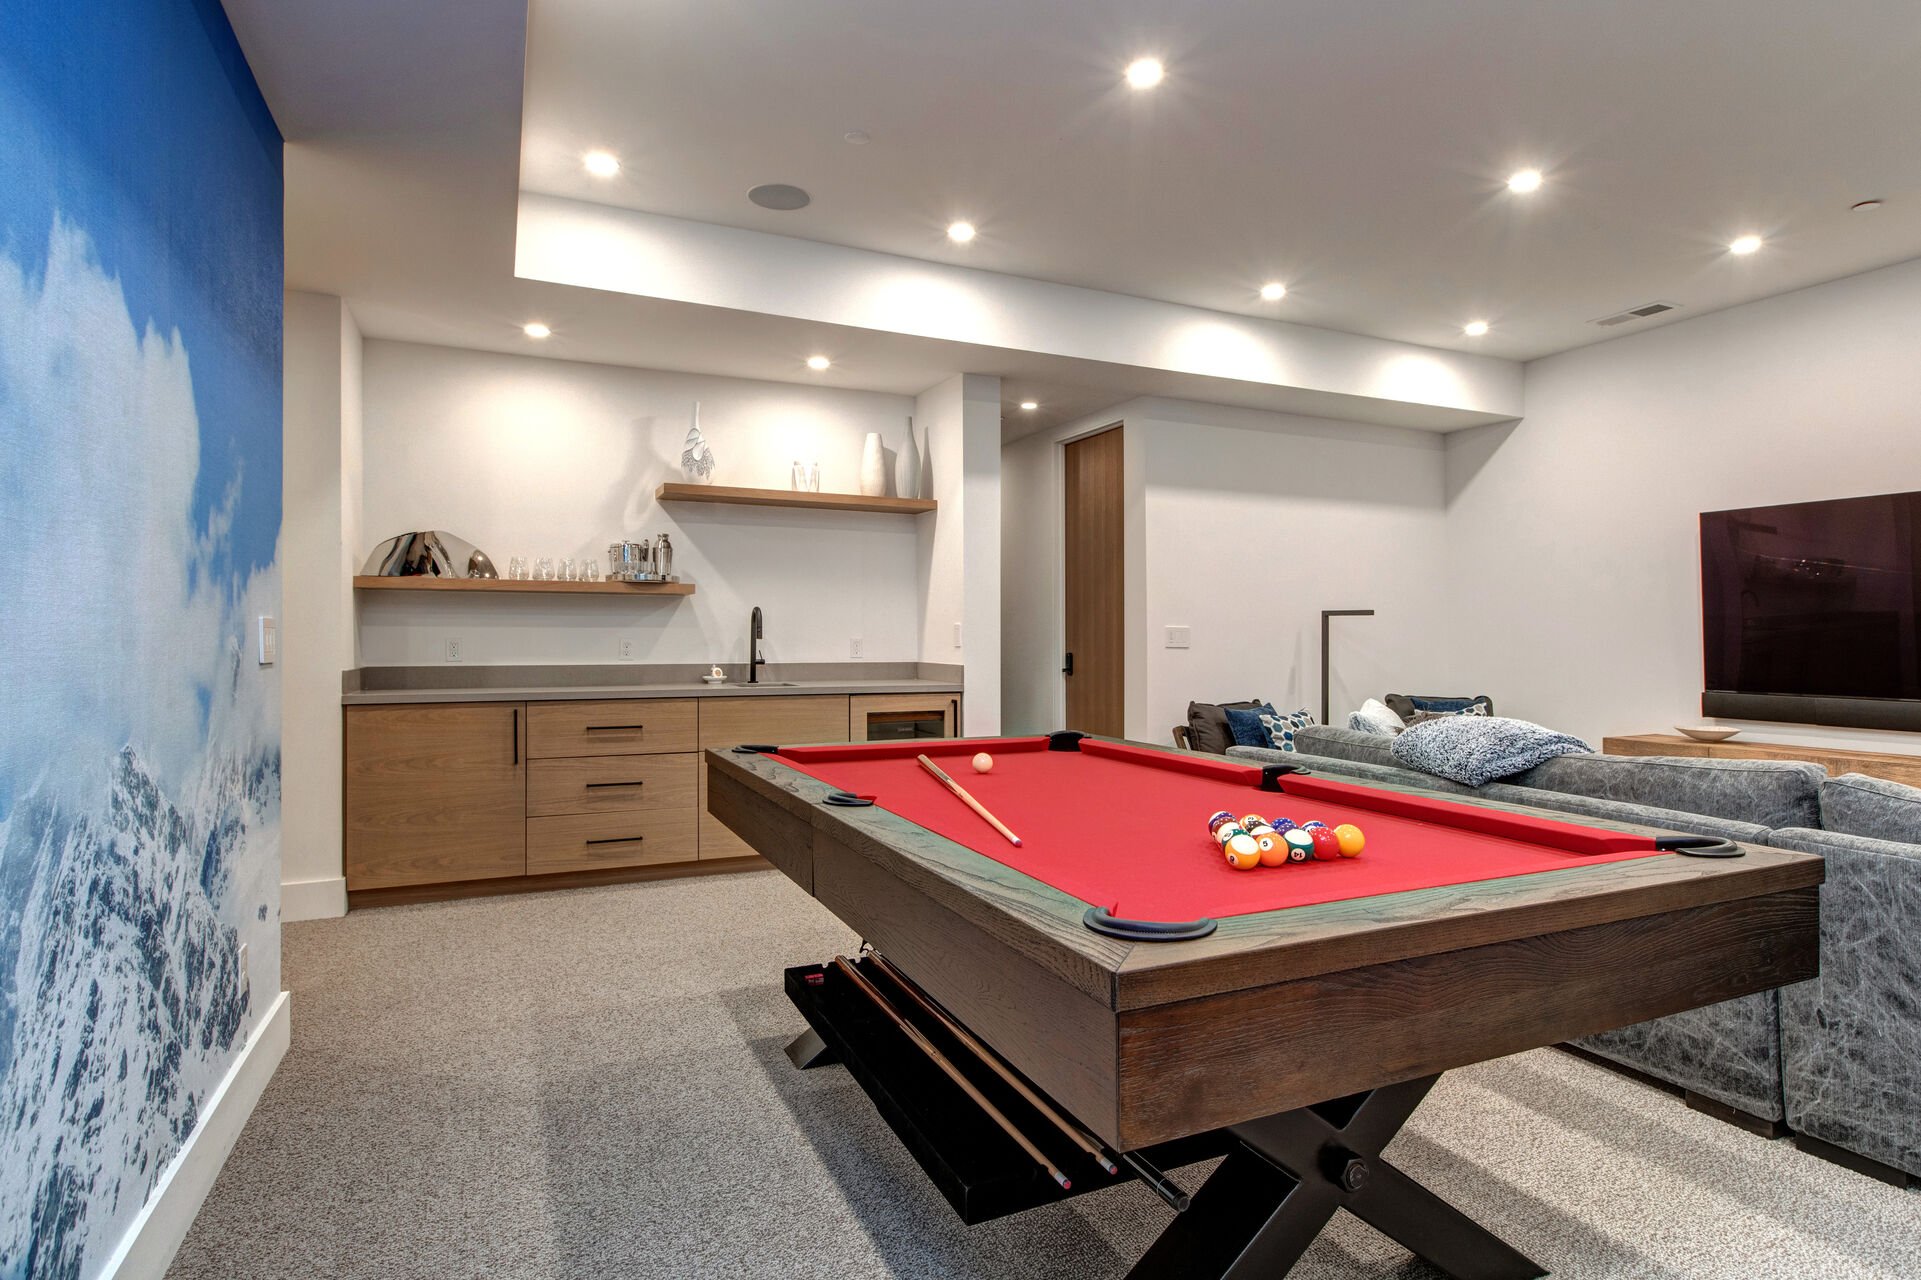 Game/Family Room with a Pool Table, Wet Bar with Mini Fridge and Board Games